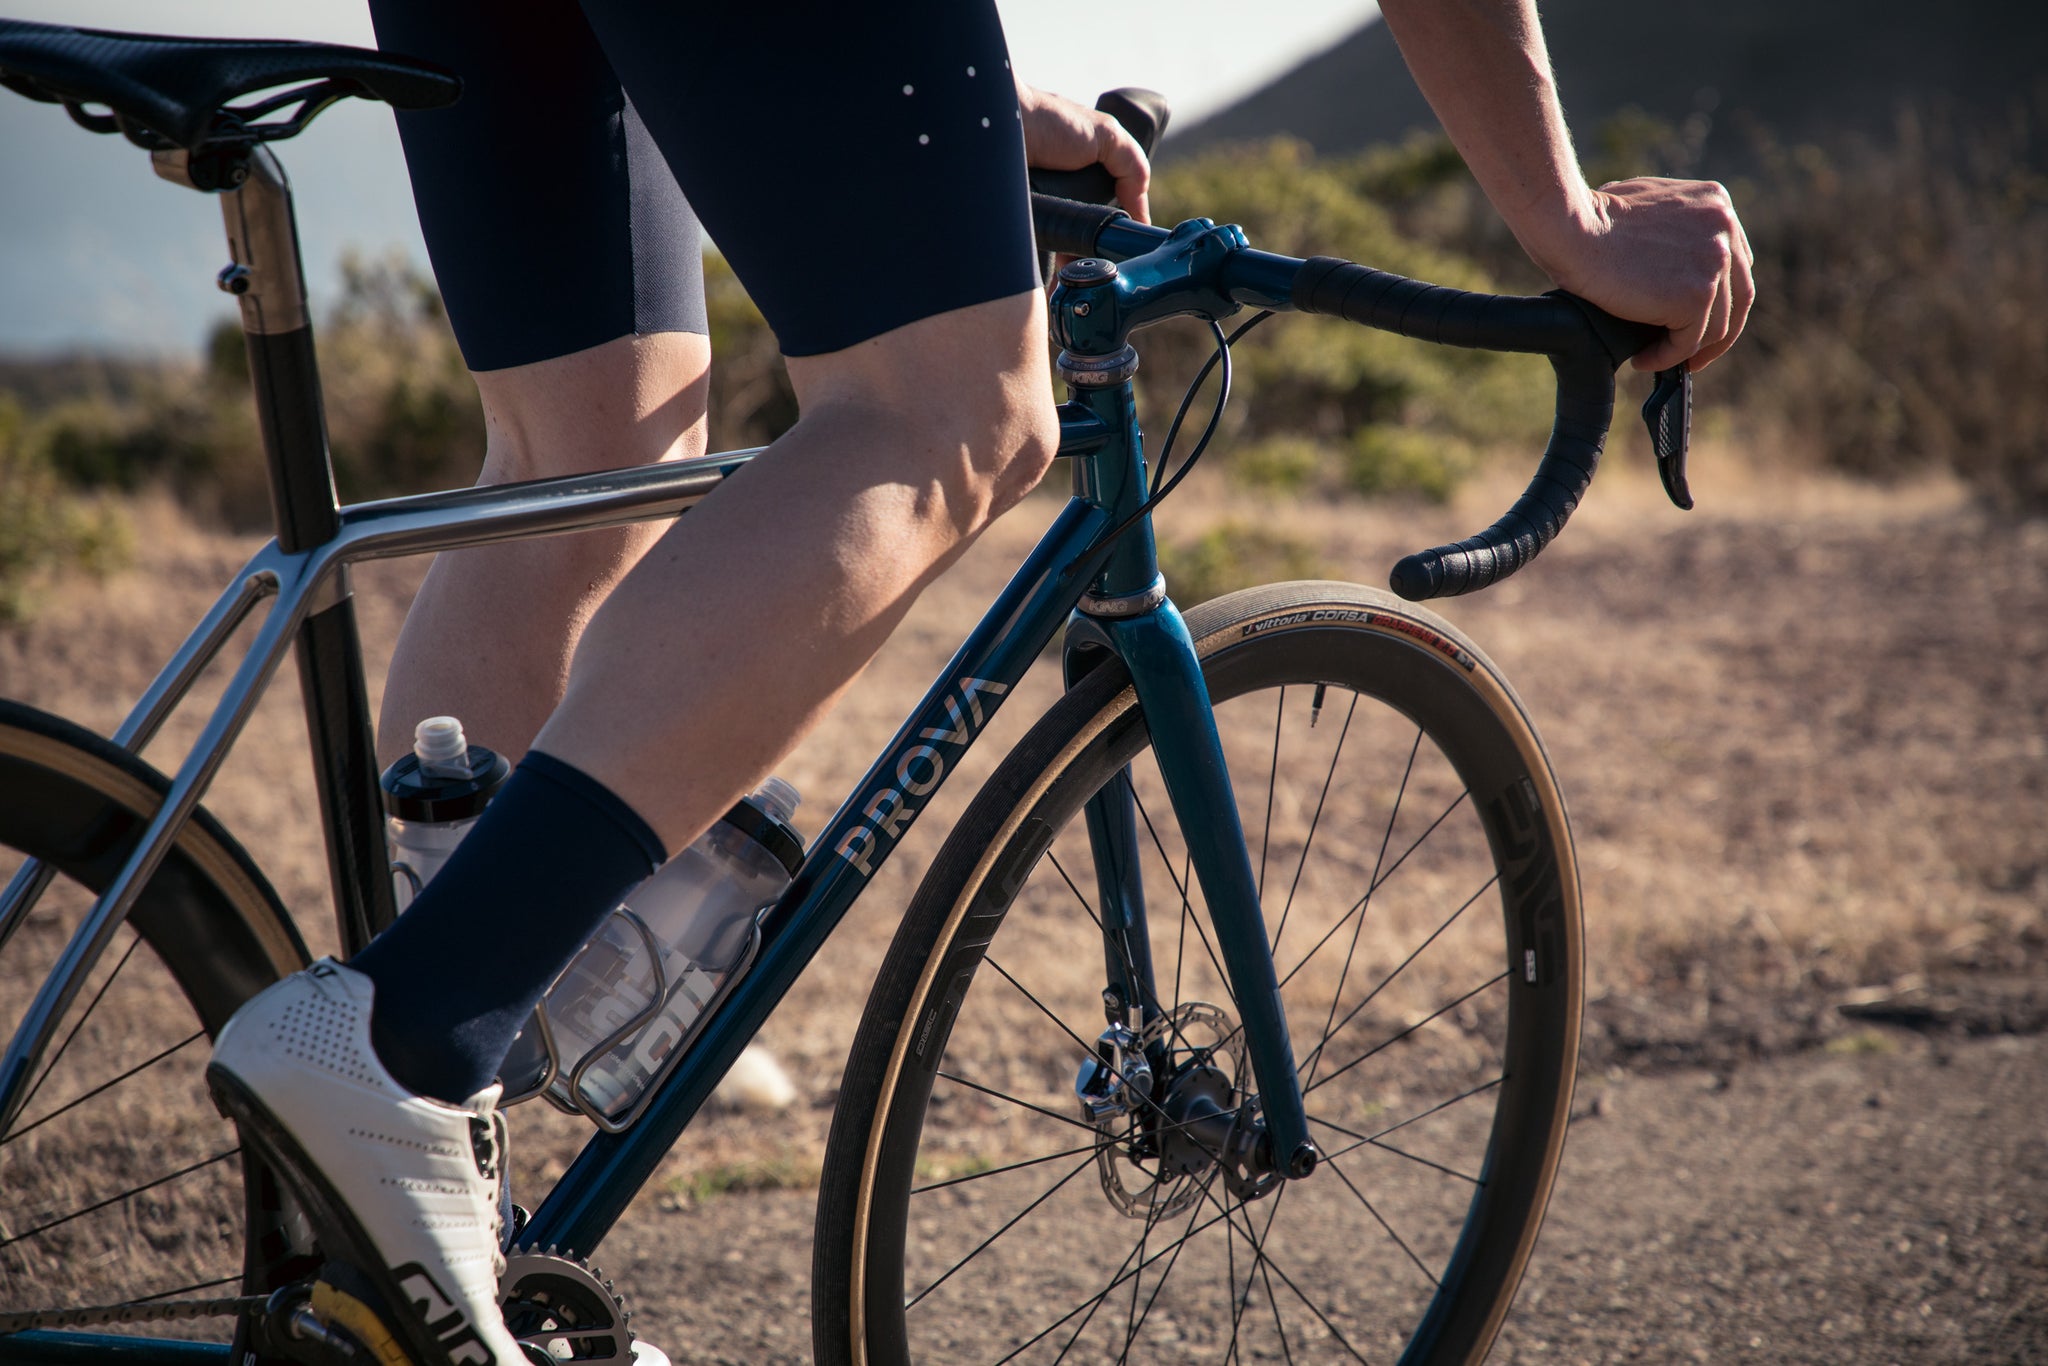 So What is Prova Cycles, Anyway? – Above Category